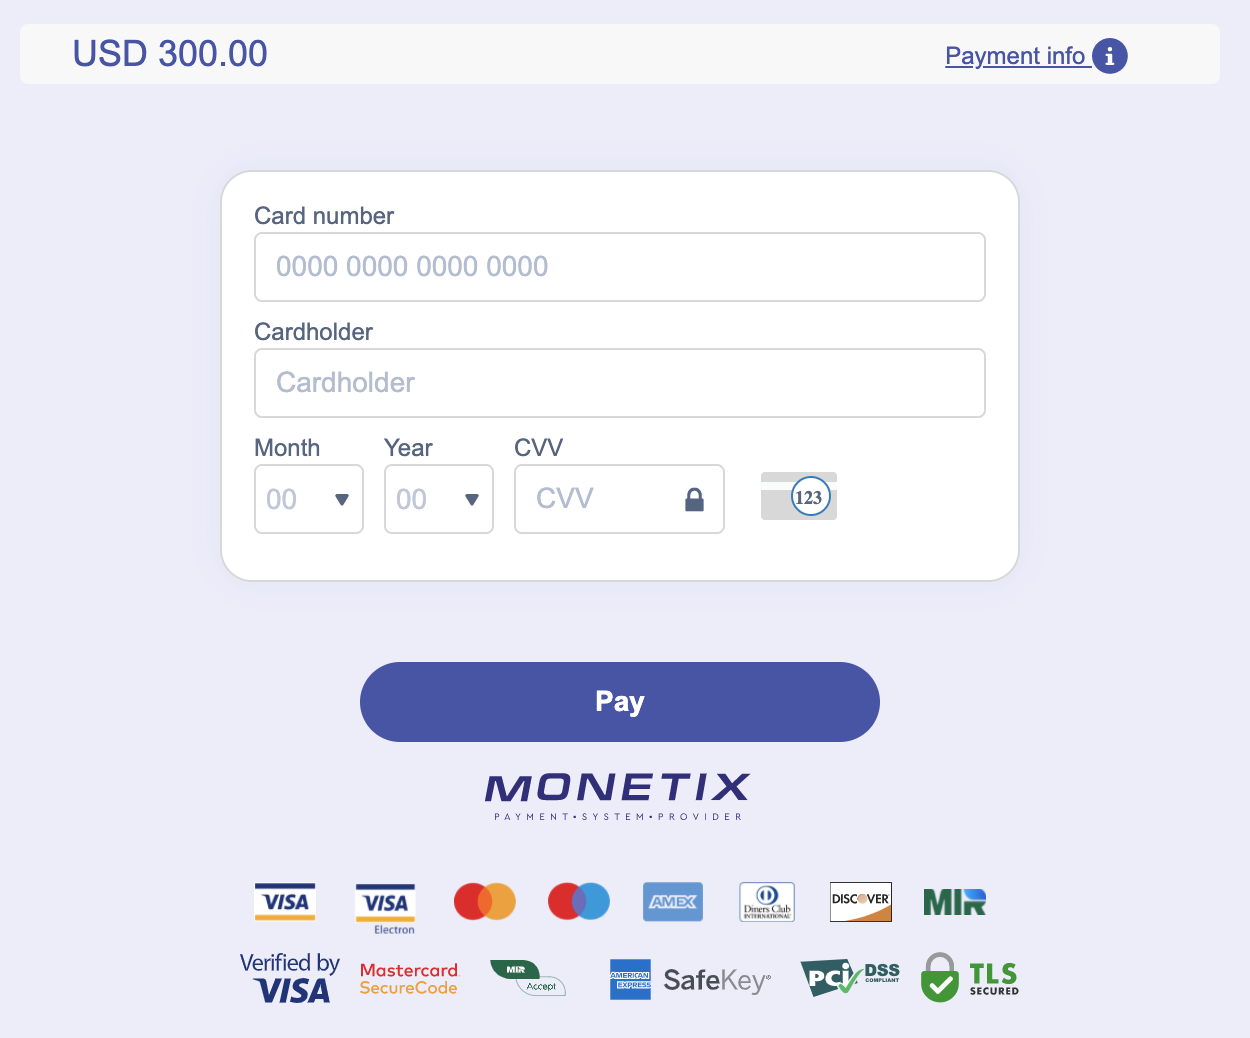 Deposit Money in Quotex via Philippines Bank Cards (Visa / MasterCard), Banks of the Philippines, E-payments (Perfect Money, PayMaya, GCash, GrabPay, Coins.ph) and Cryptocurrencies